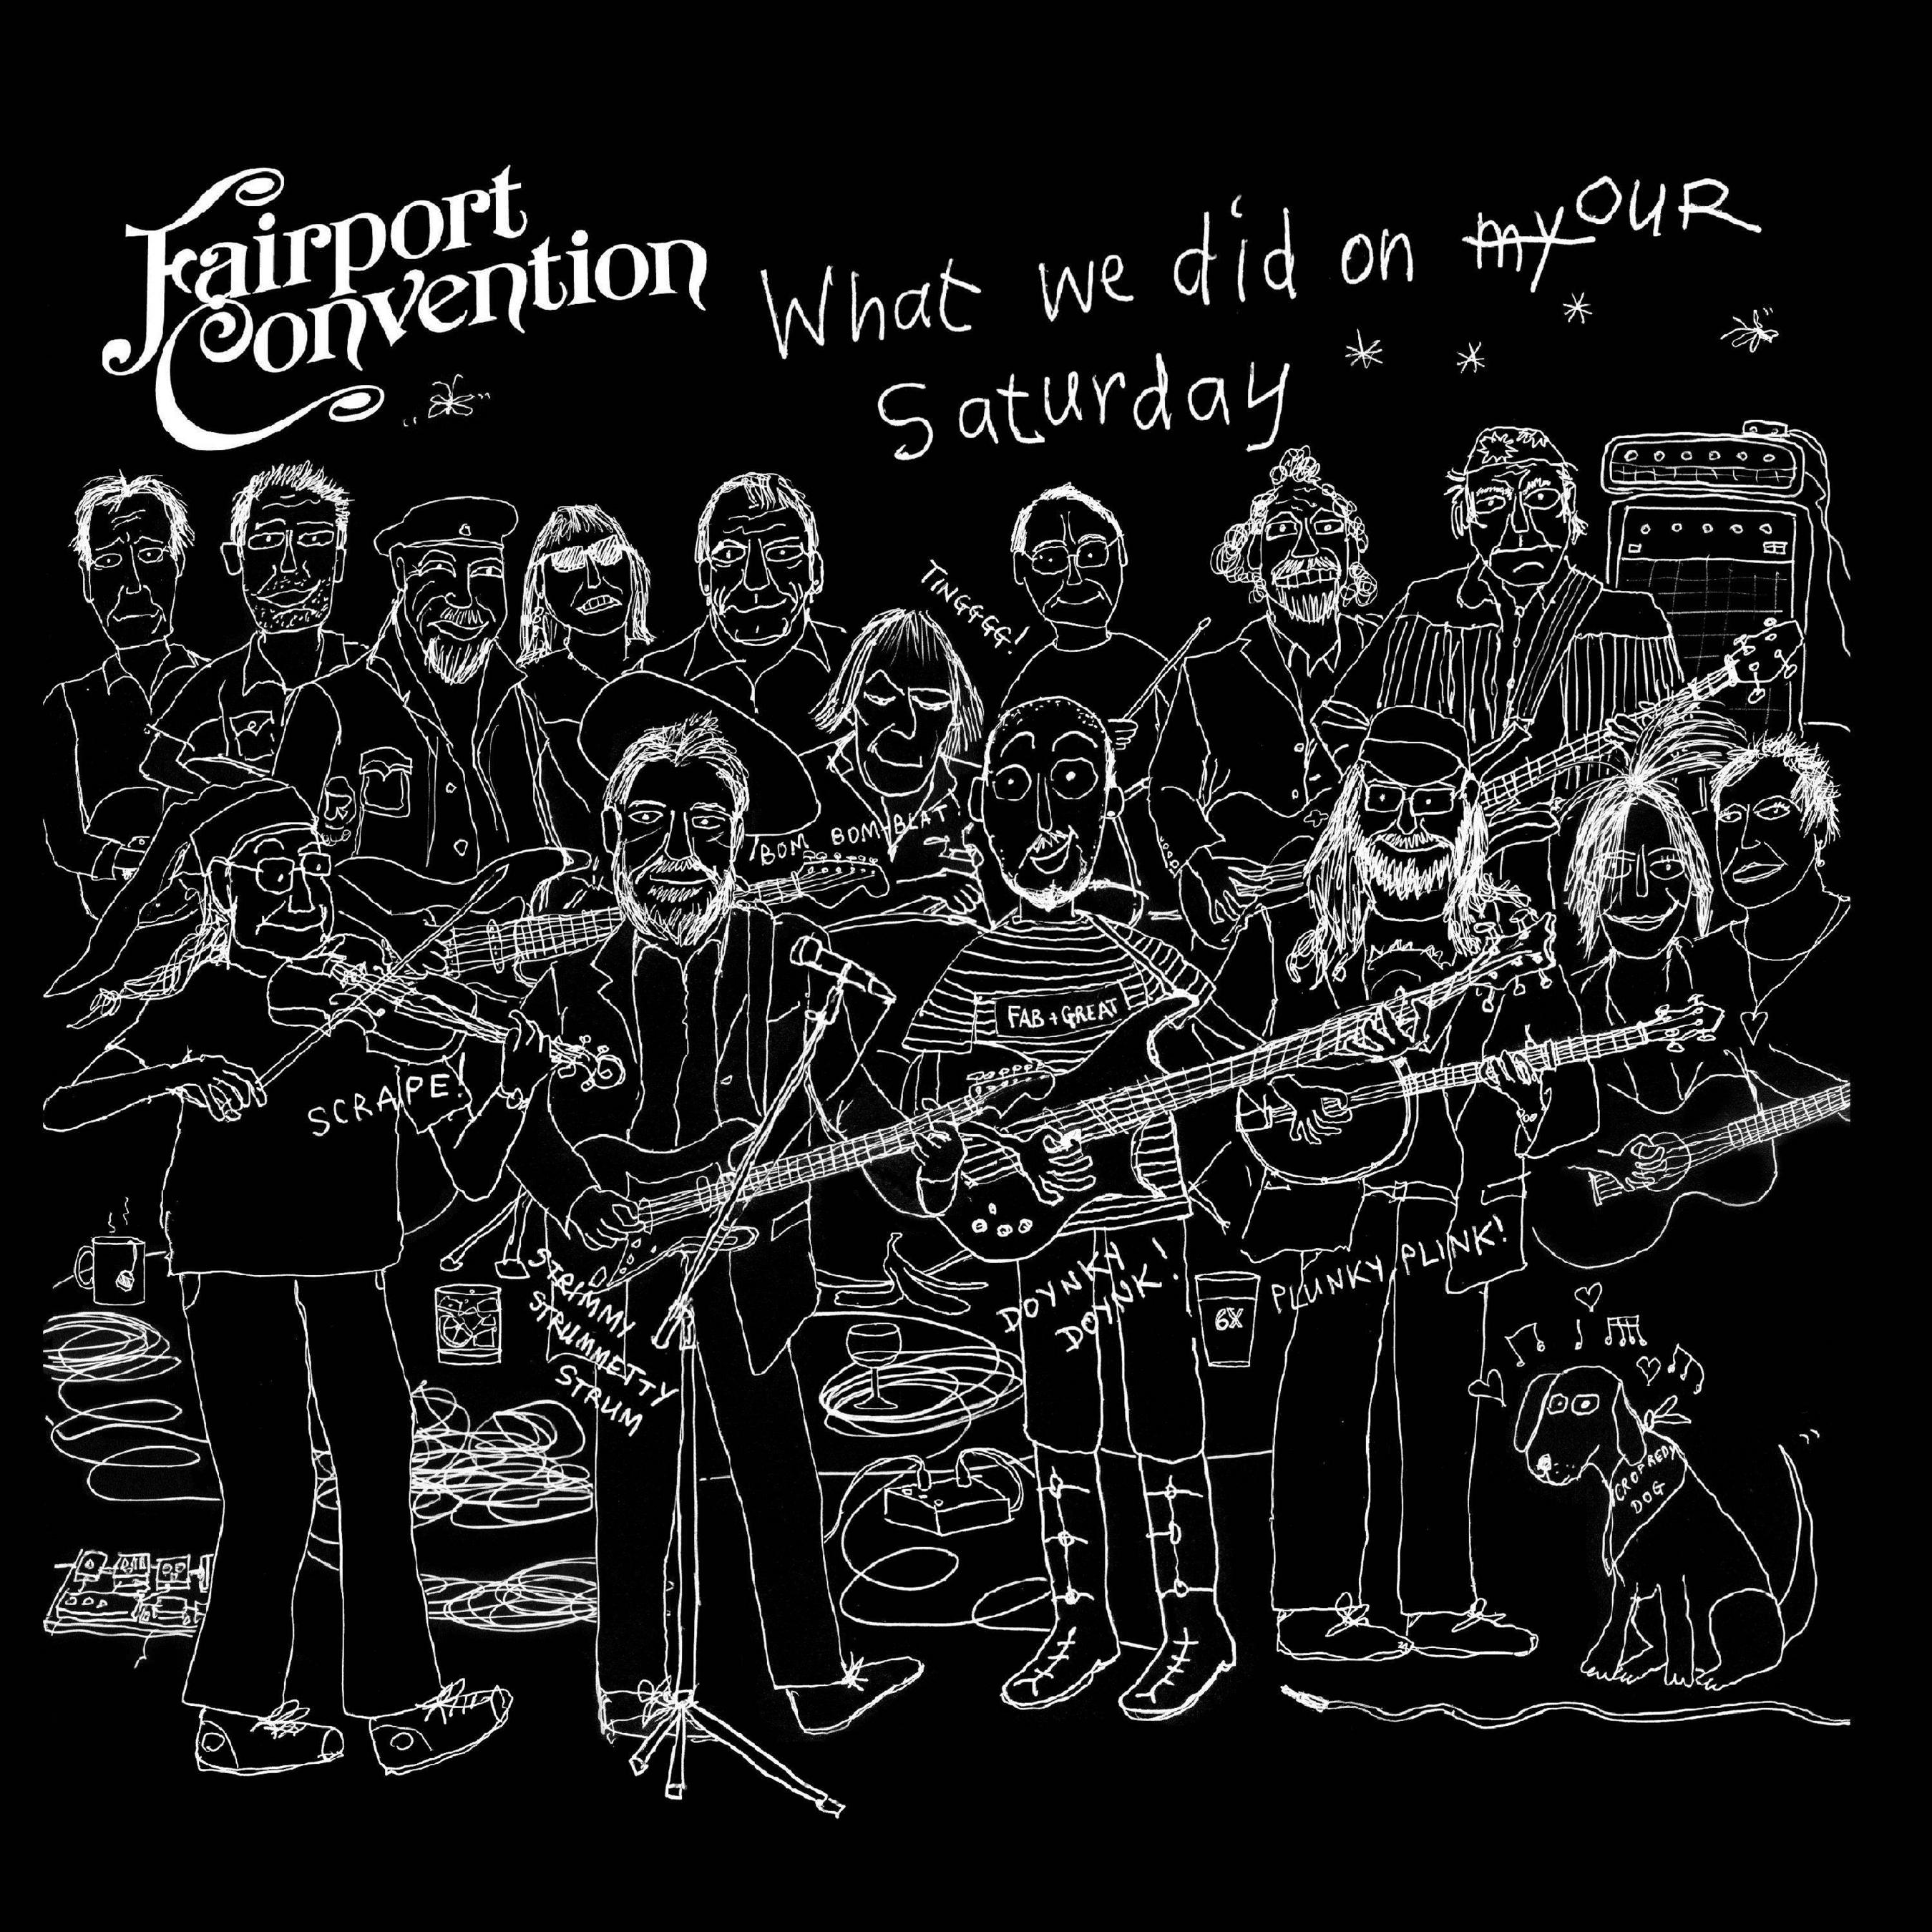 Fairport Convention - What We Did On Our Saturday (2018) [FLAC 24bit/48kHz]